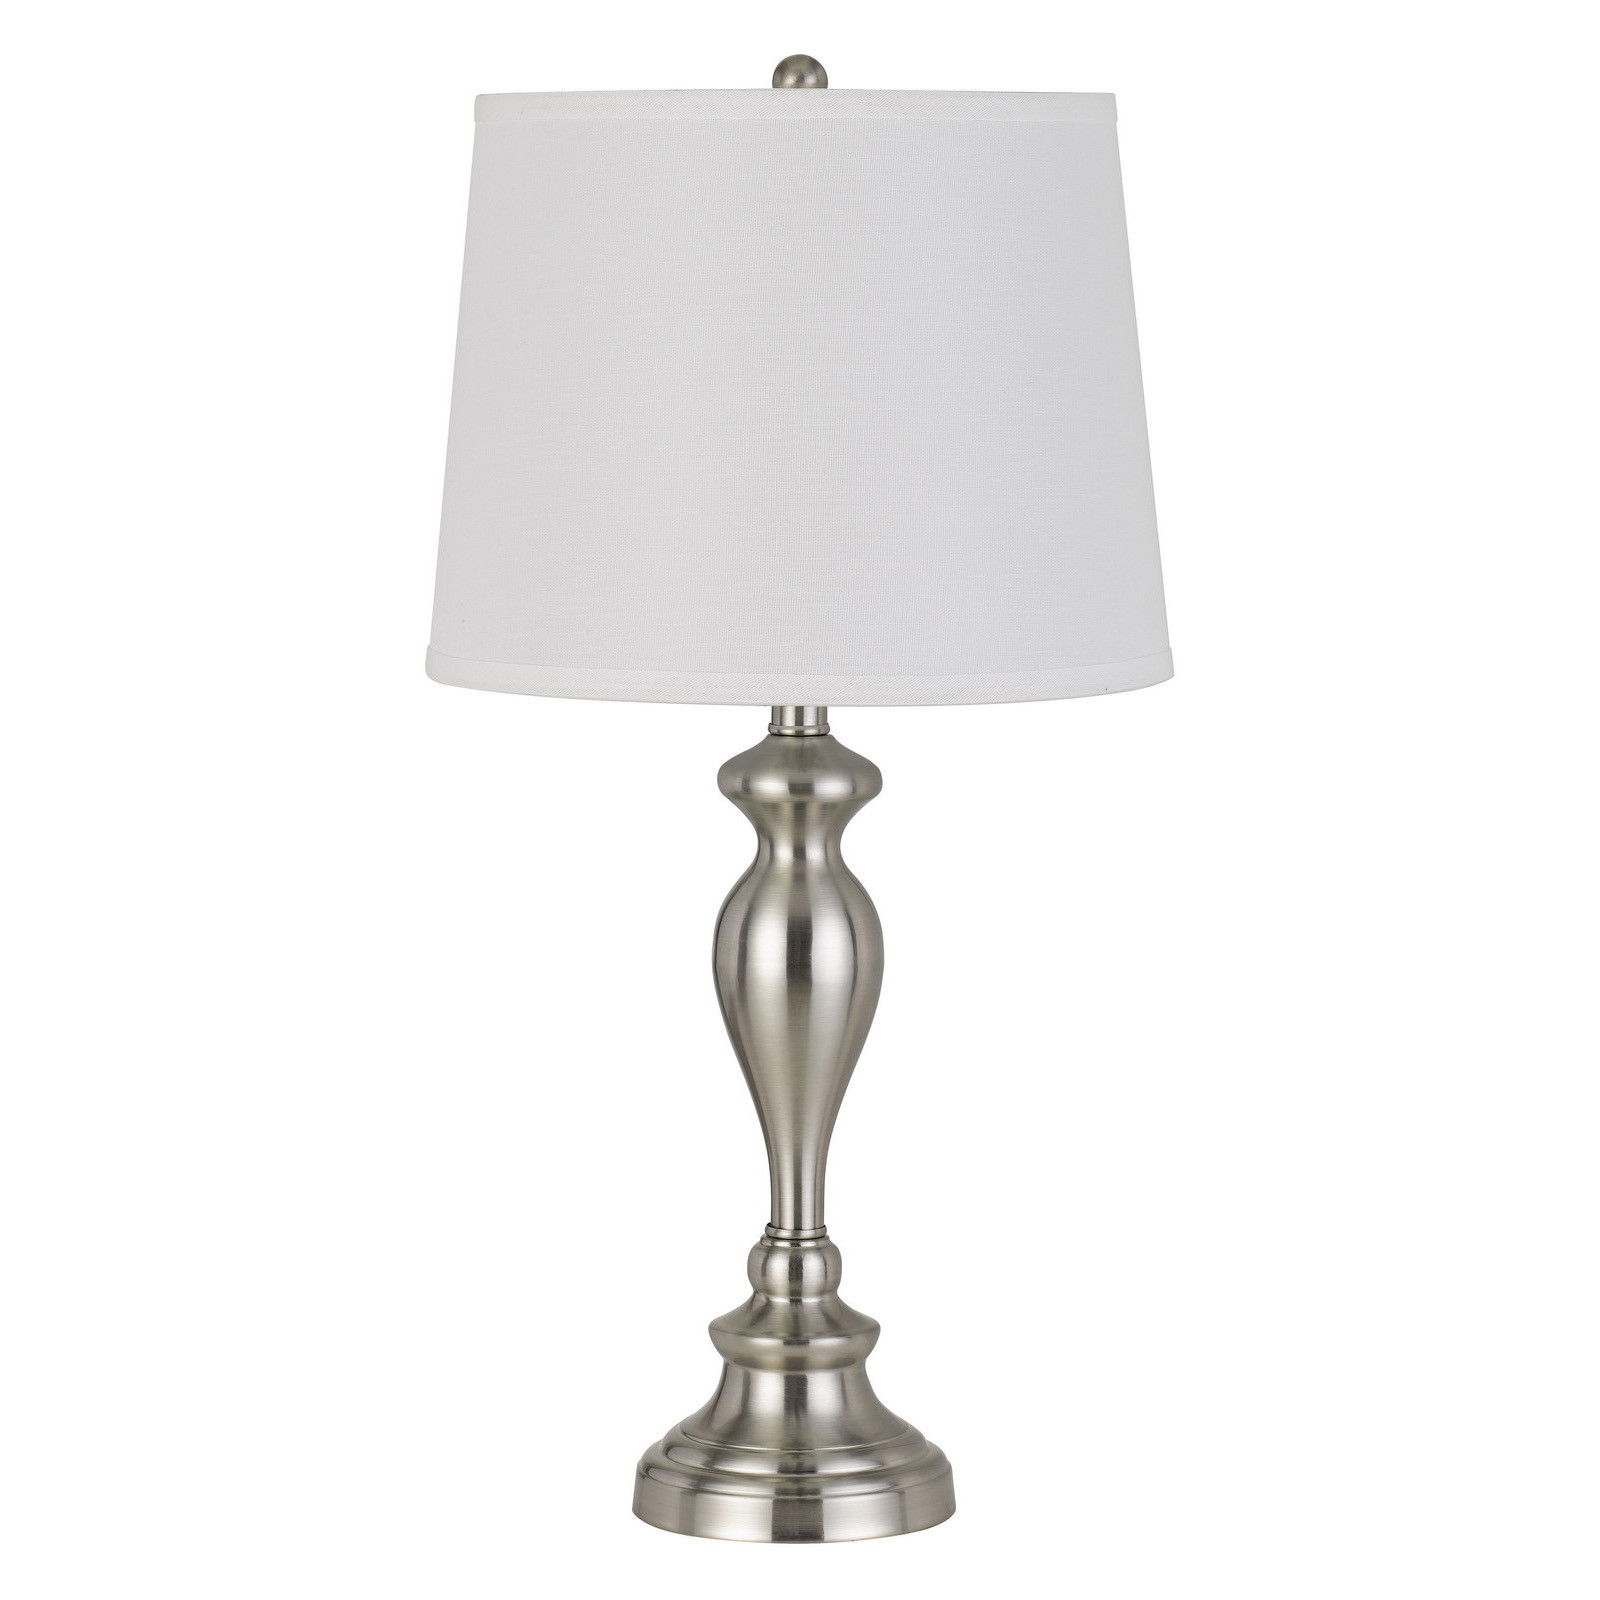 Set of Two 26" Classy Metal Table Lamps